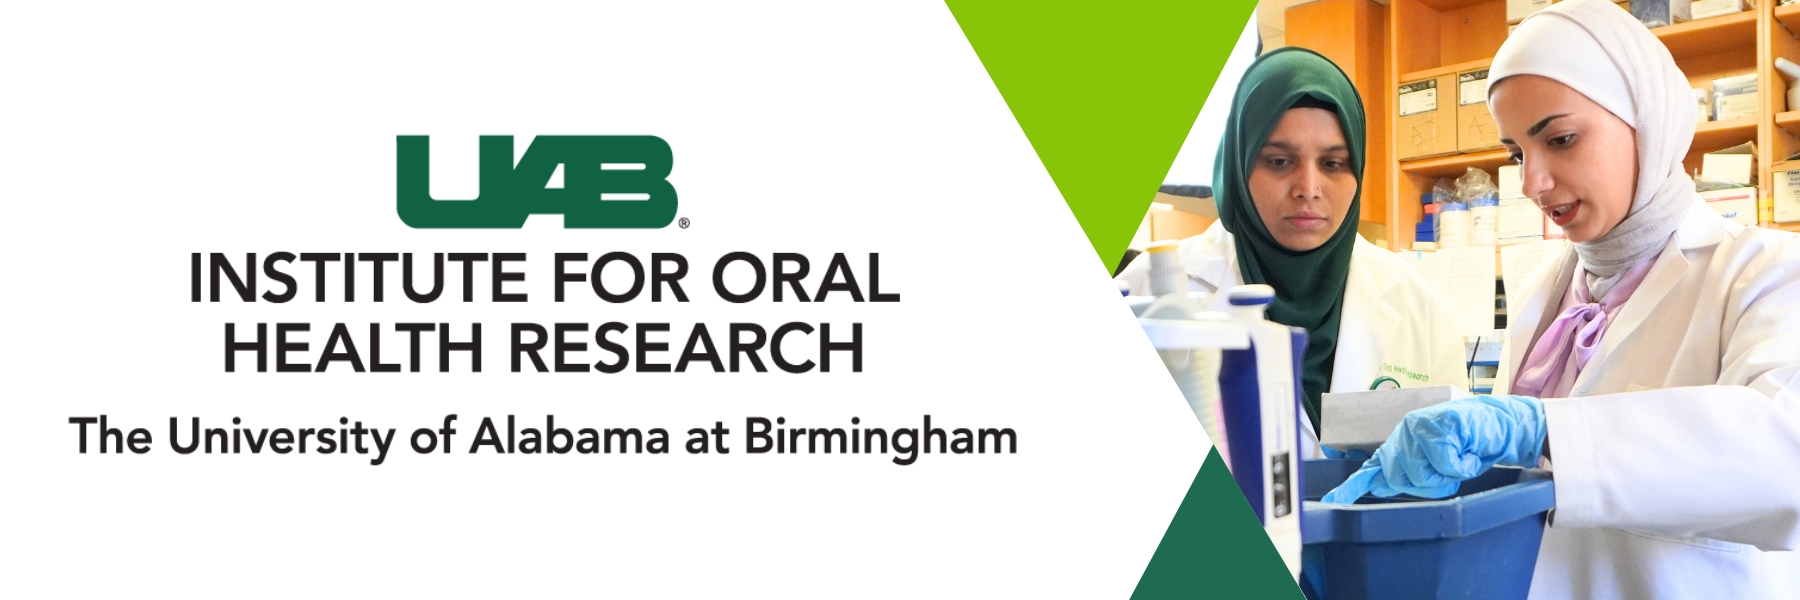 Institute for Oral Health Research logo and student researchers working in lab